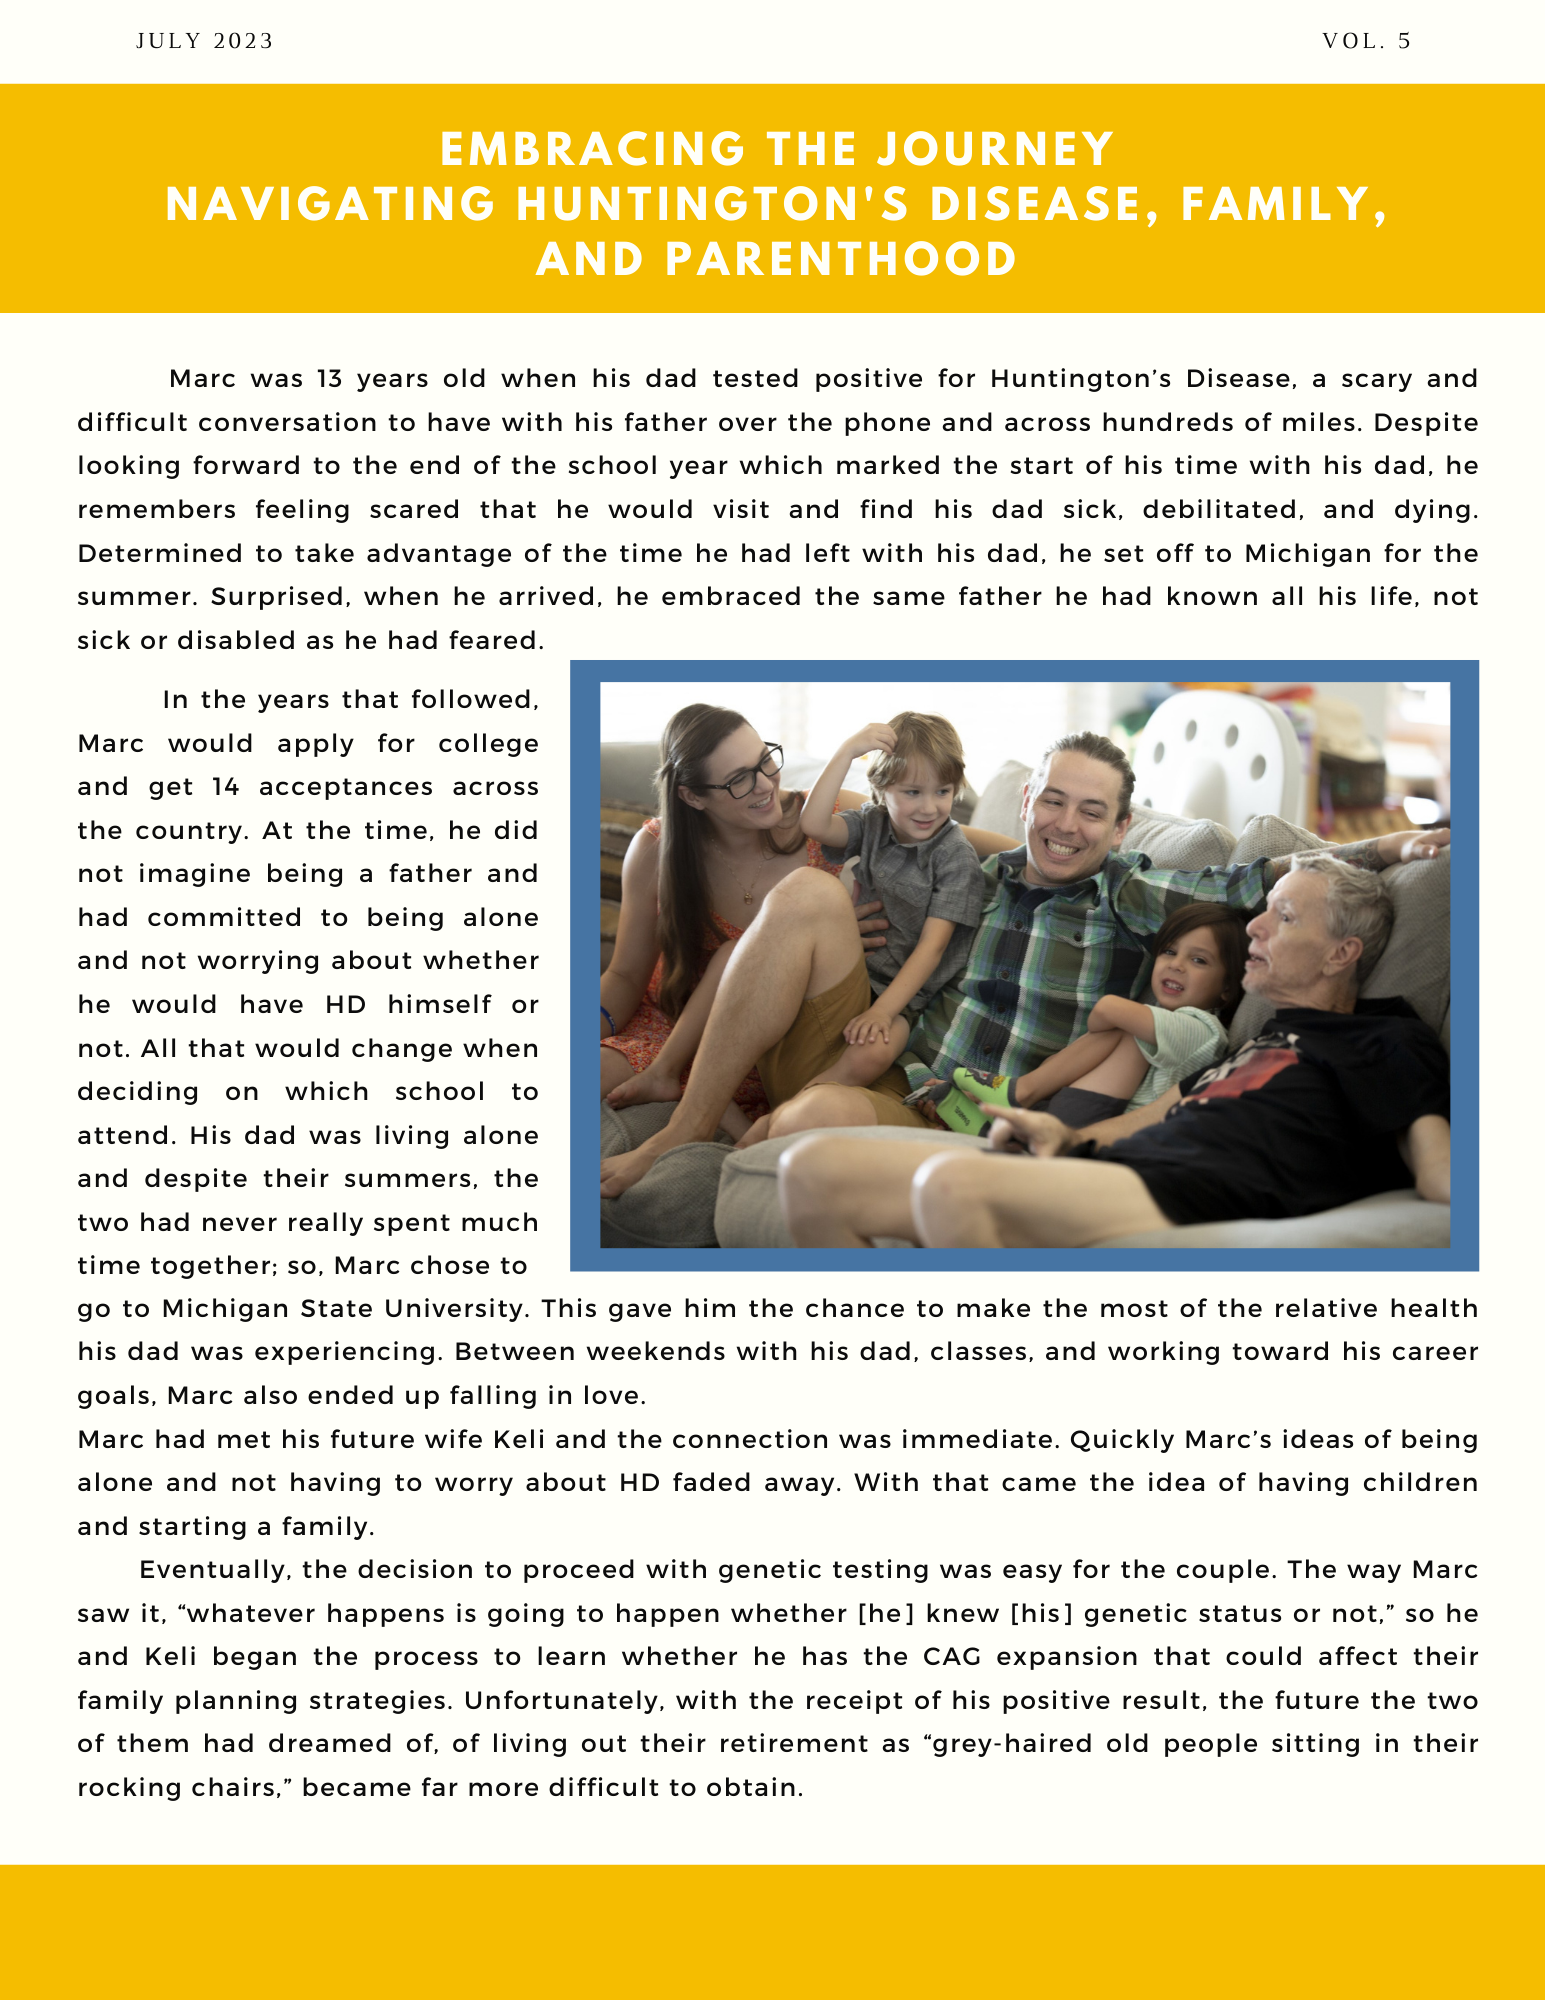 7.23 - 2nd Page: Embracing the Journey Navigating Huntington's Disease, Family, and Parenthood